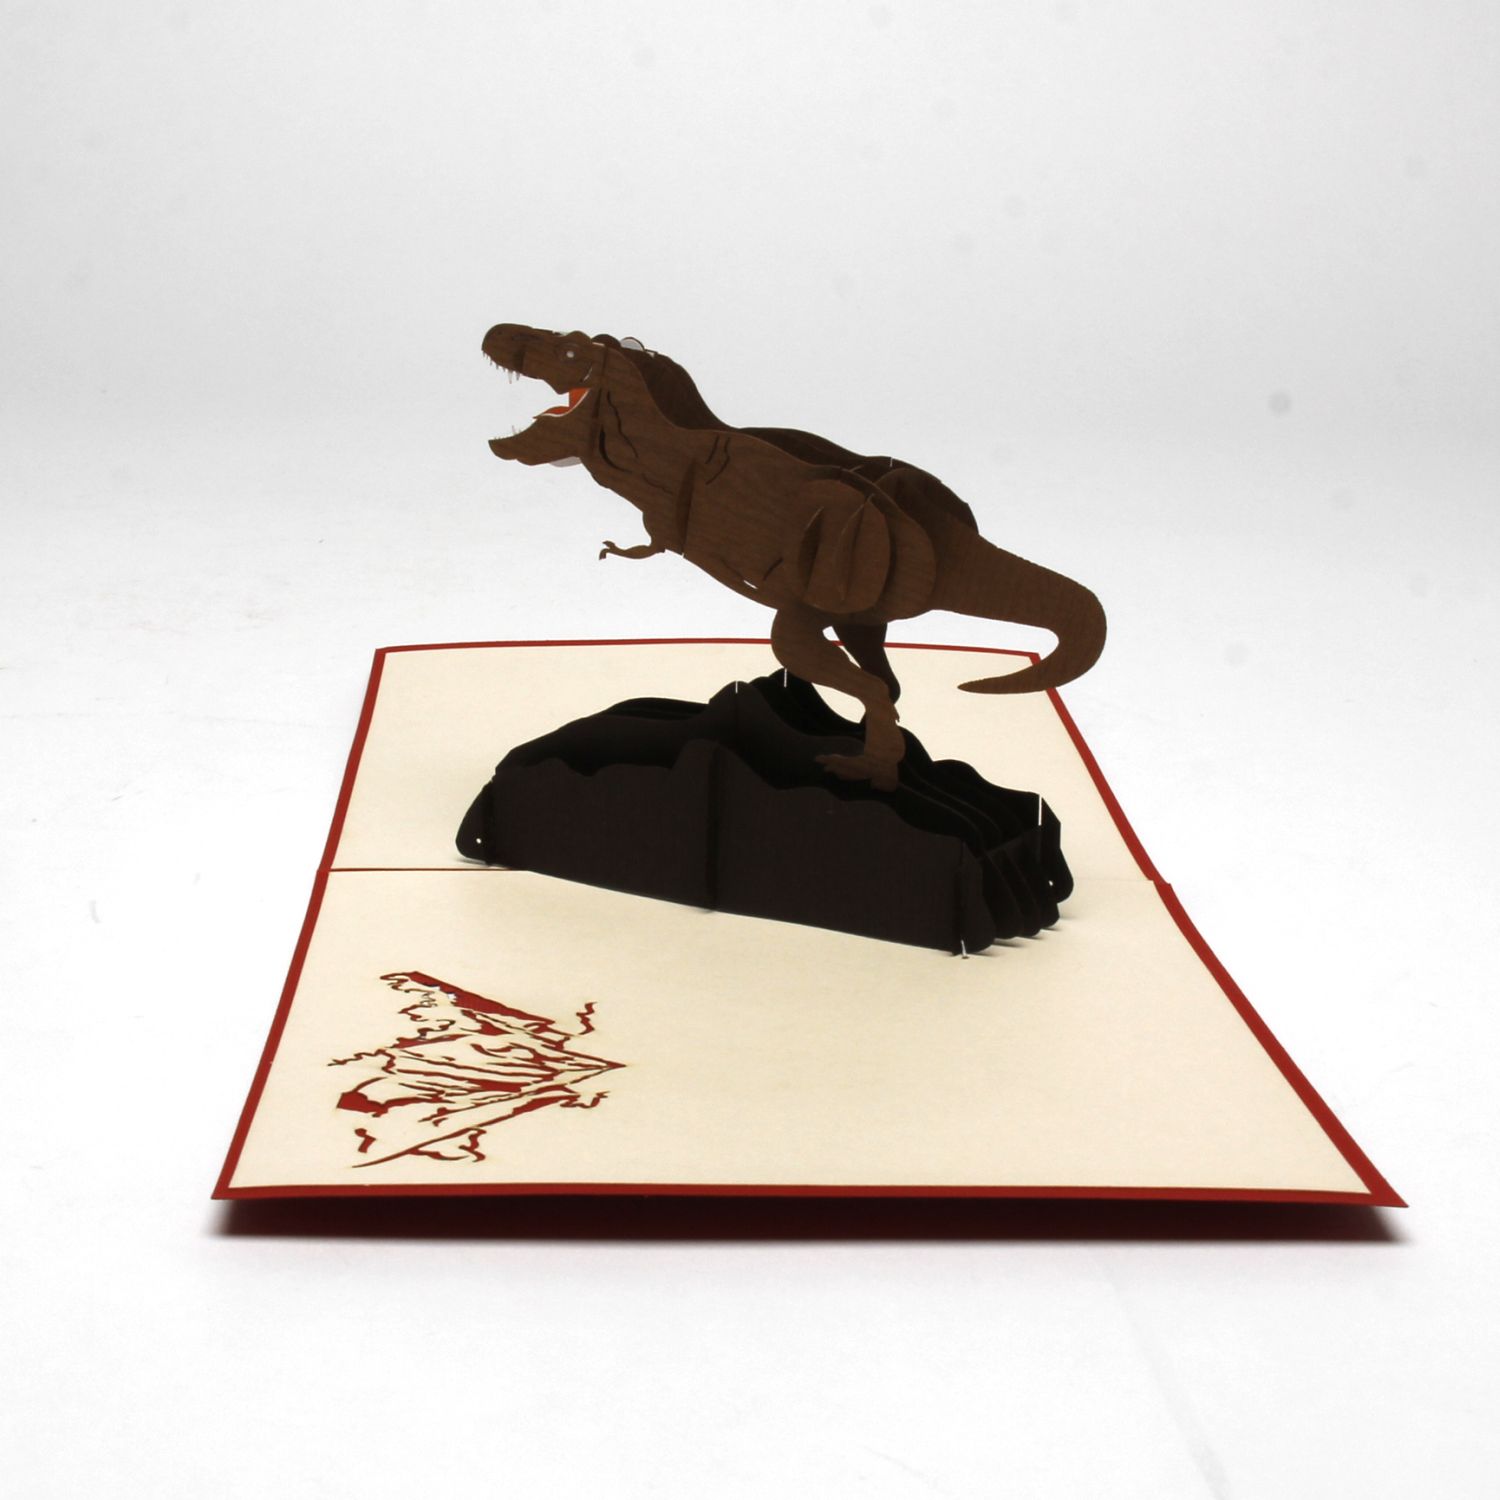 Roses without Thorns: Dinosaur Product Image 1 of 4